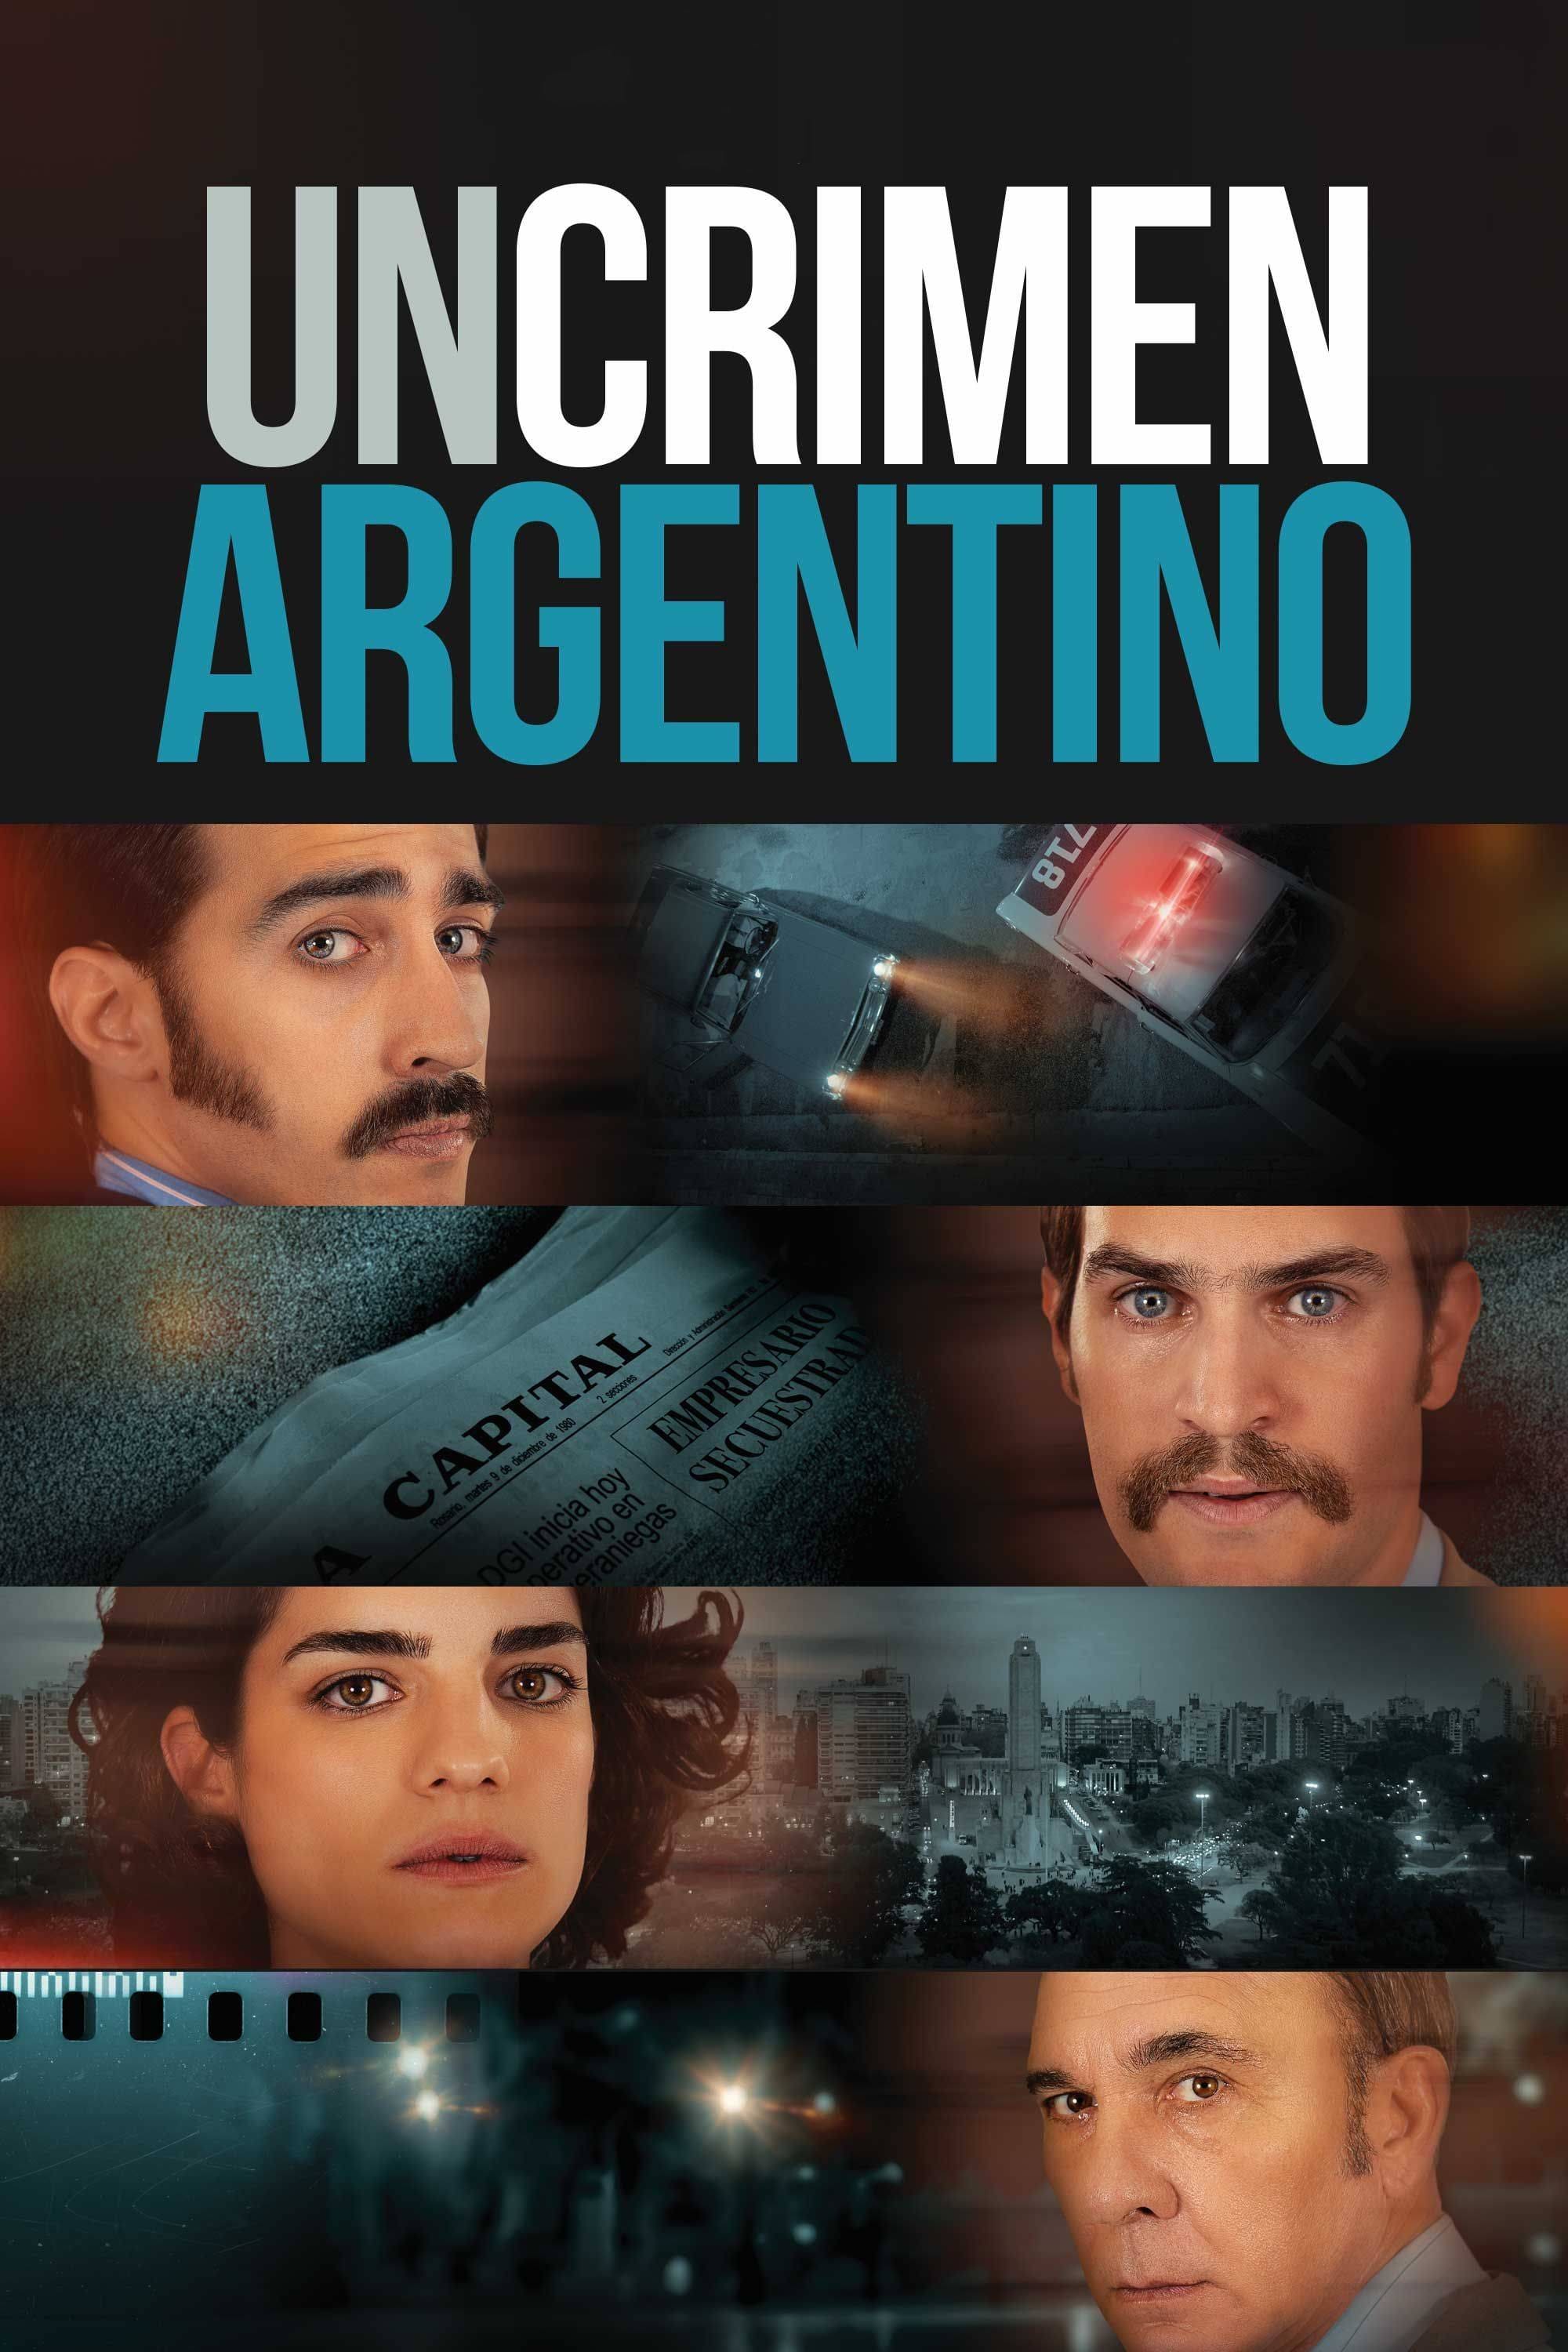 An Argentinian Crime